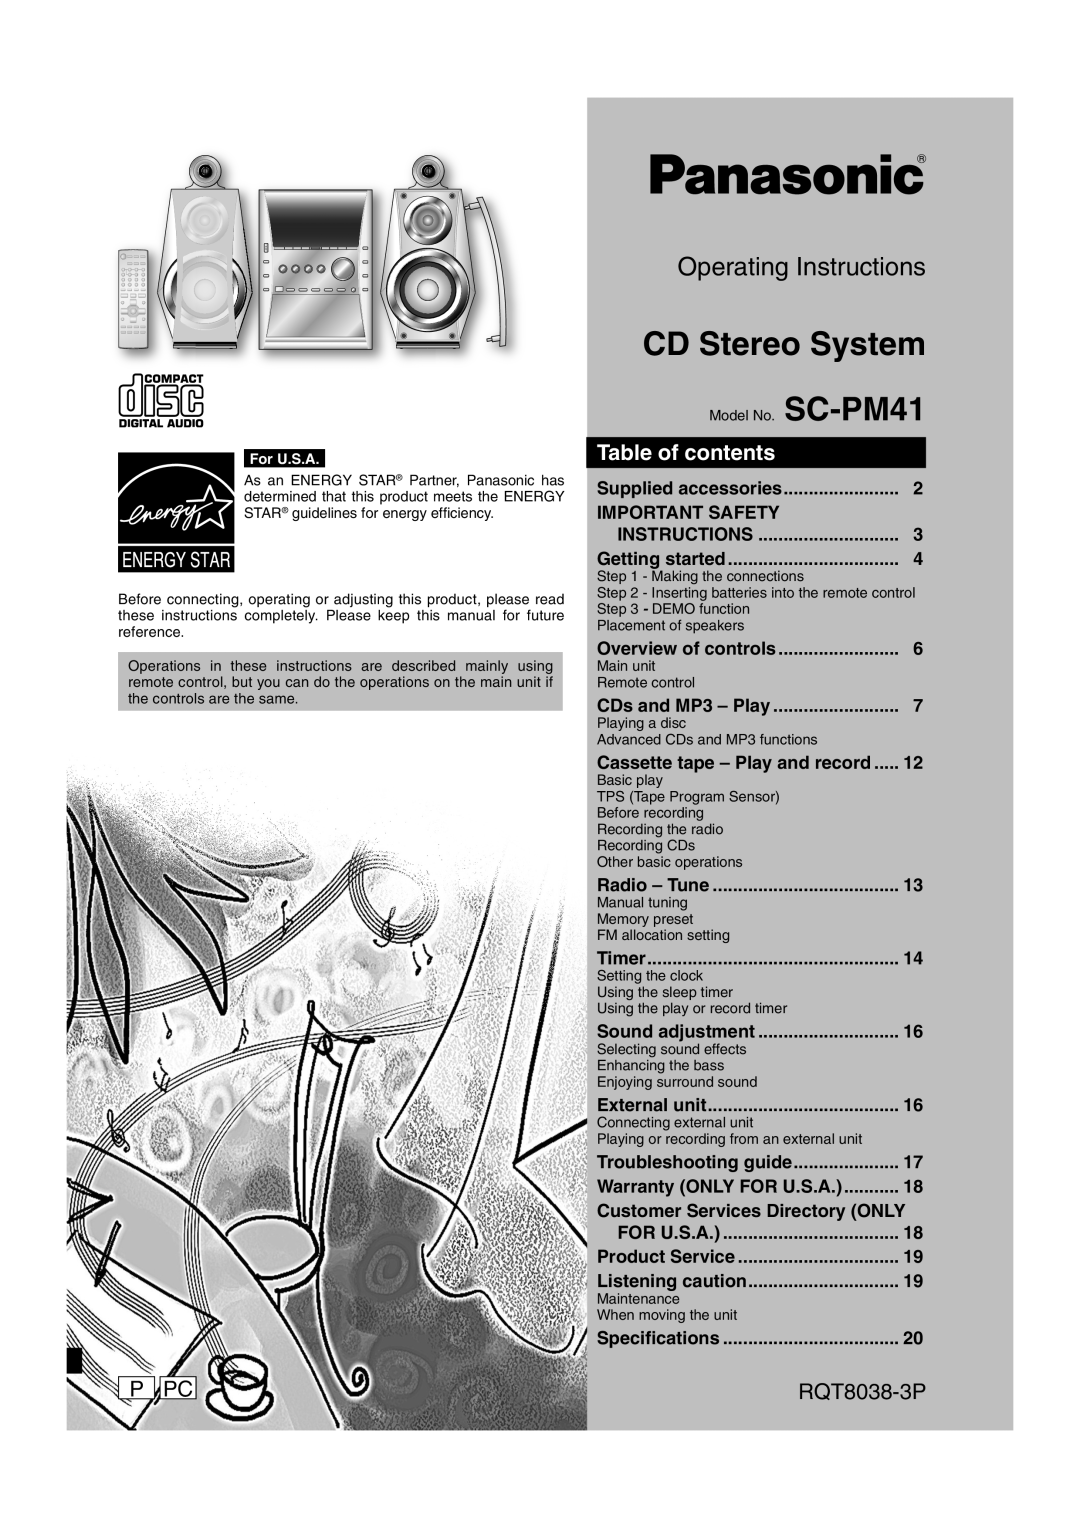 Panasonic SC-PM41 important safety instructions P Pc, Table of contents, RQT8038-3P, CD Stereo System 